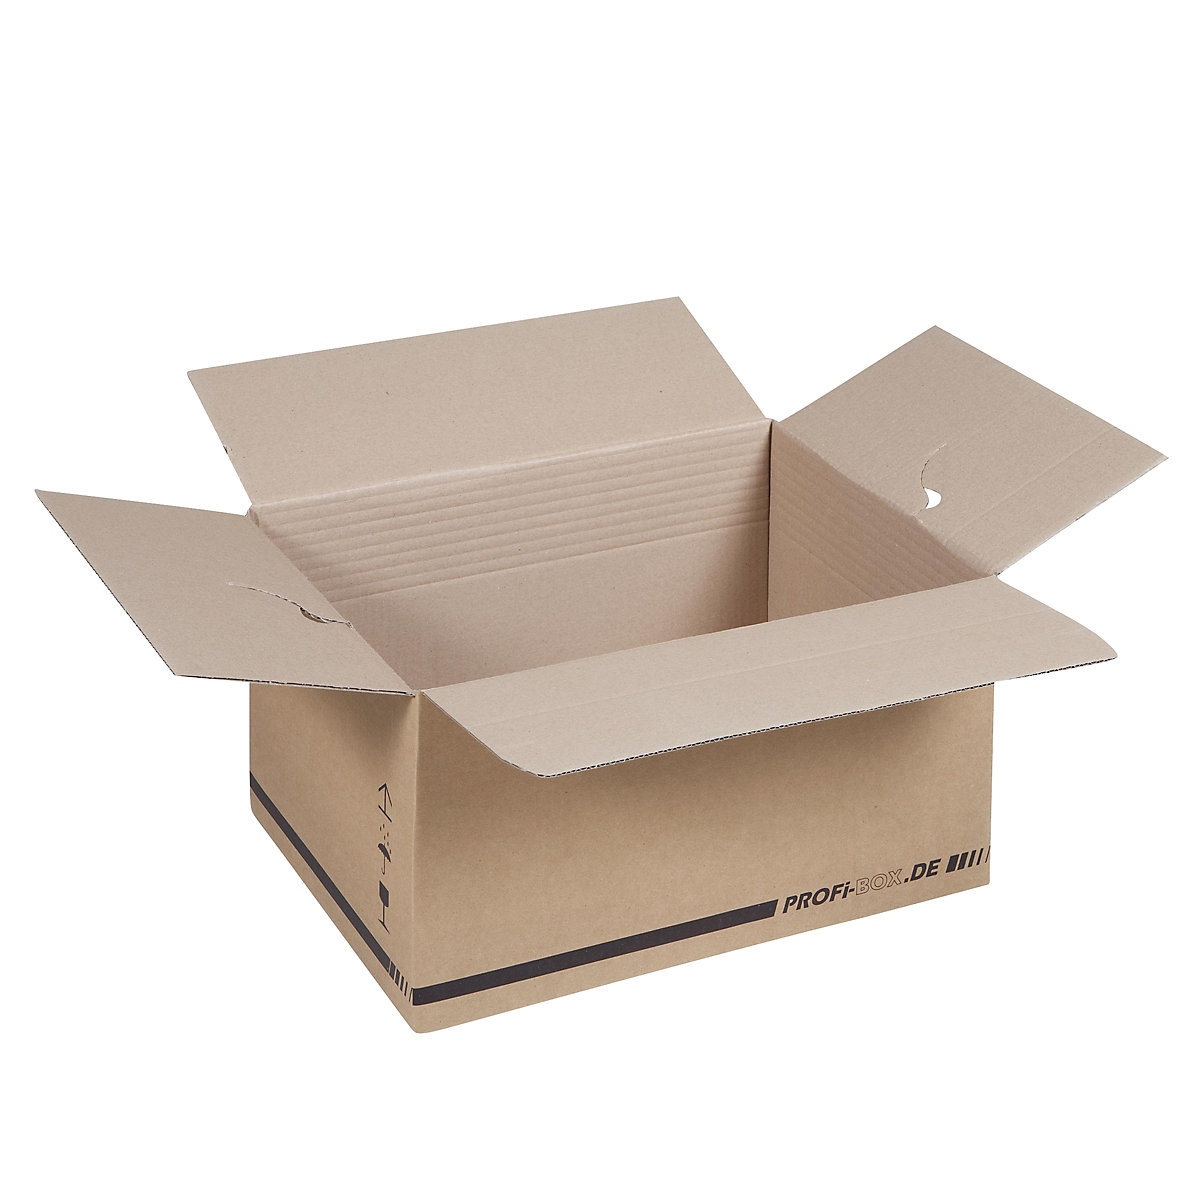 Professional boxes, made of single fluted cardboard, FEFCO 0701, internal dimensions 445 x 315 x 235 mm, pack of 50-10